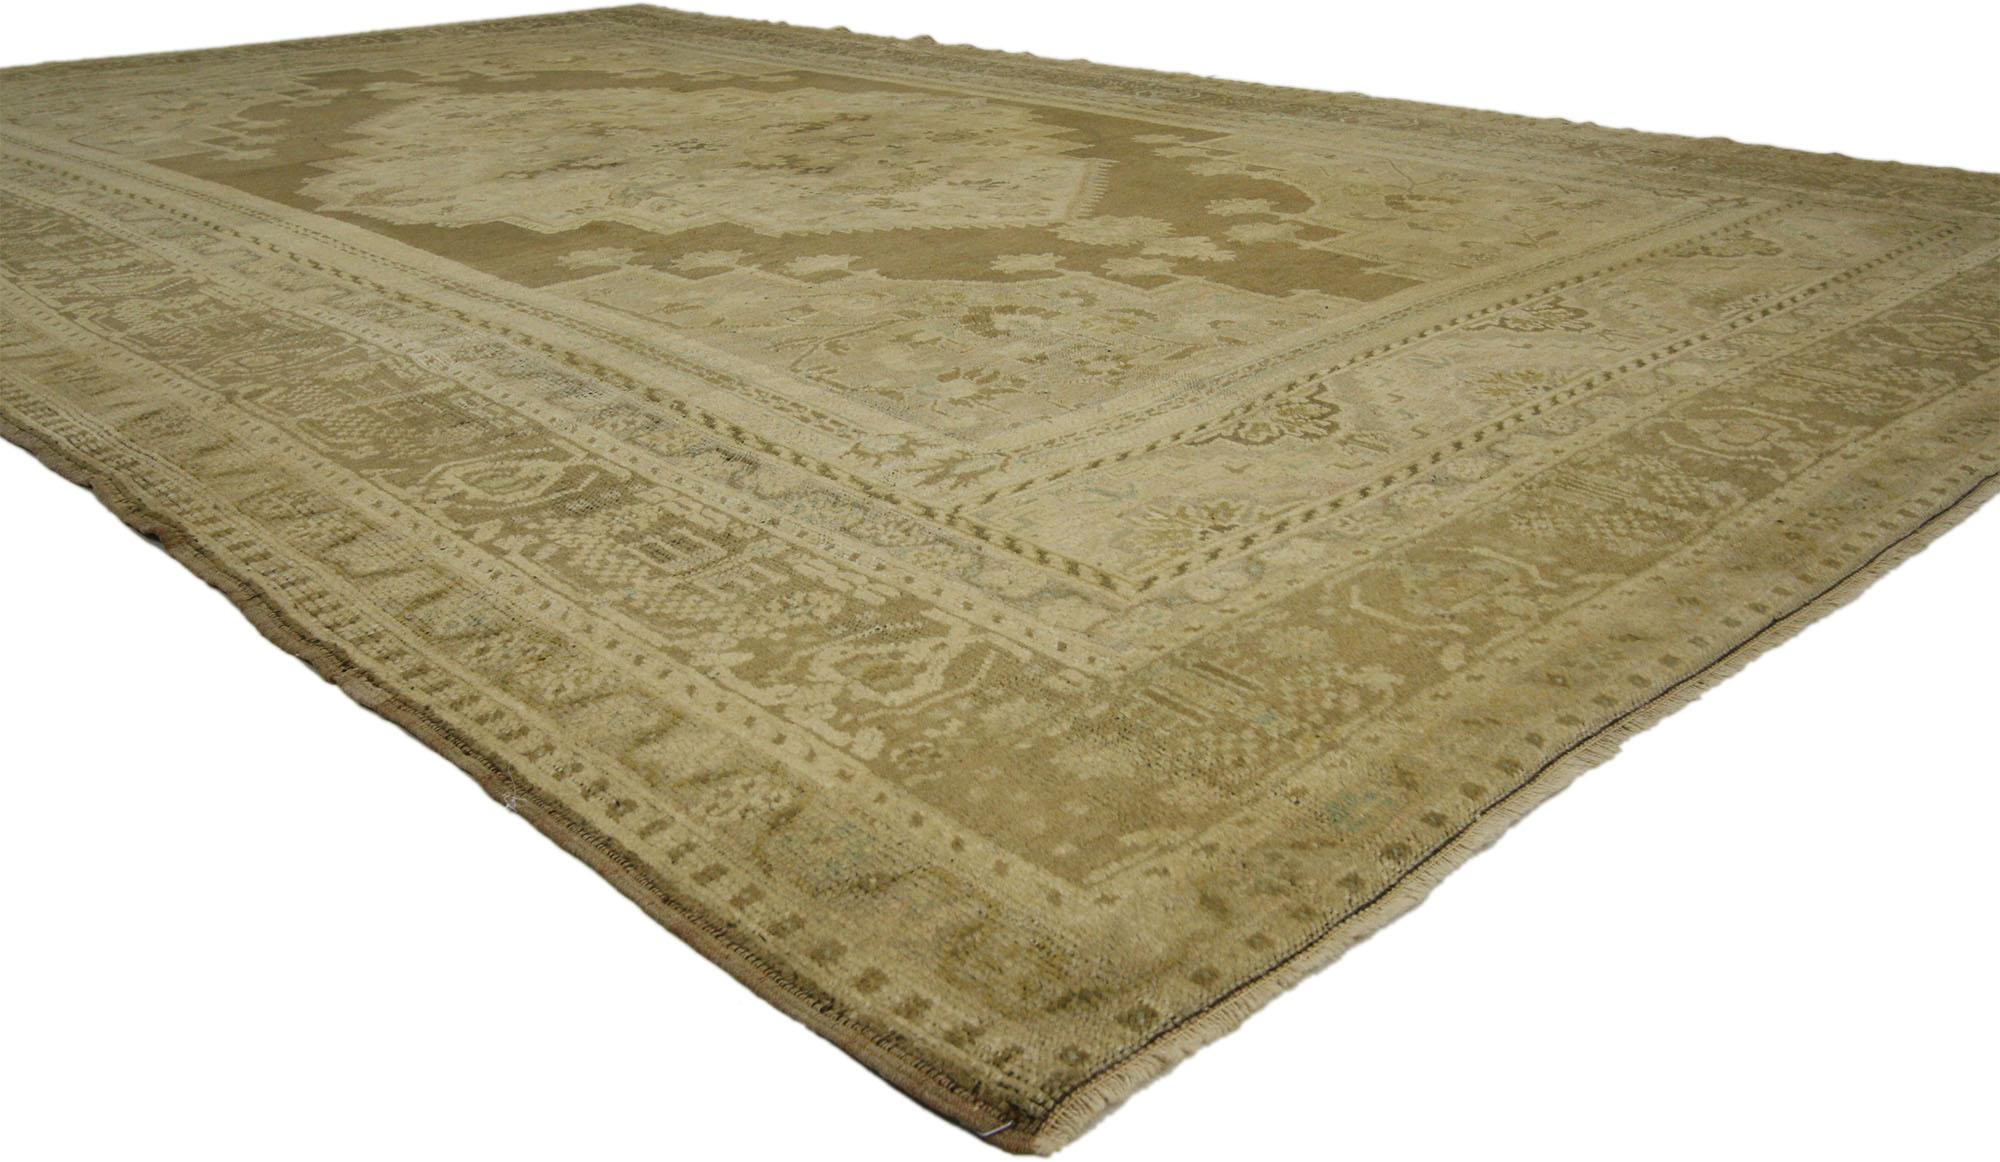 73942 Vintage Turkish Oushak Gallery Rug with Modern Shaker Style 07'03 x 12'05. Emanating sophistication and grace with warm, neutral colors, this hand knotted wool contemporary Turkish Oushak gallery rug beautifully embodies a modern Shaker style.